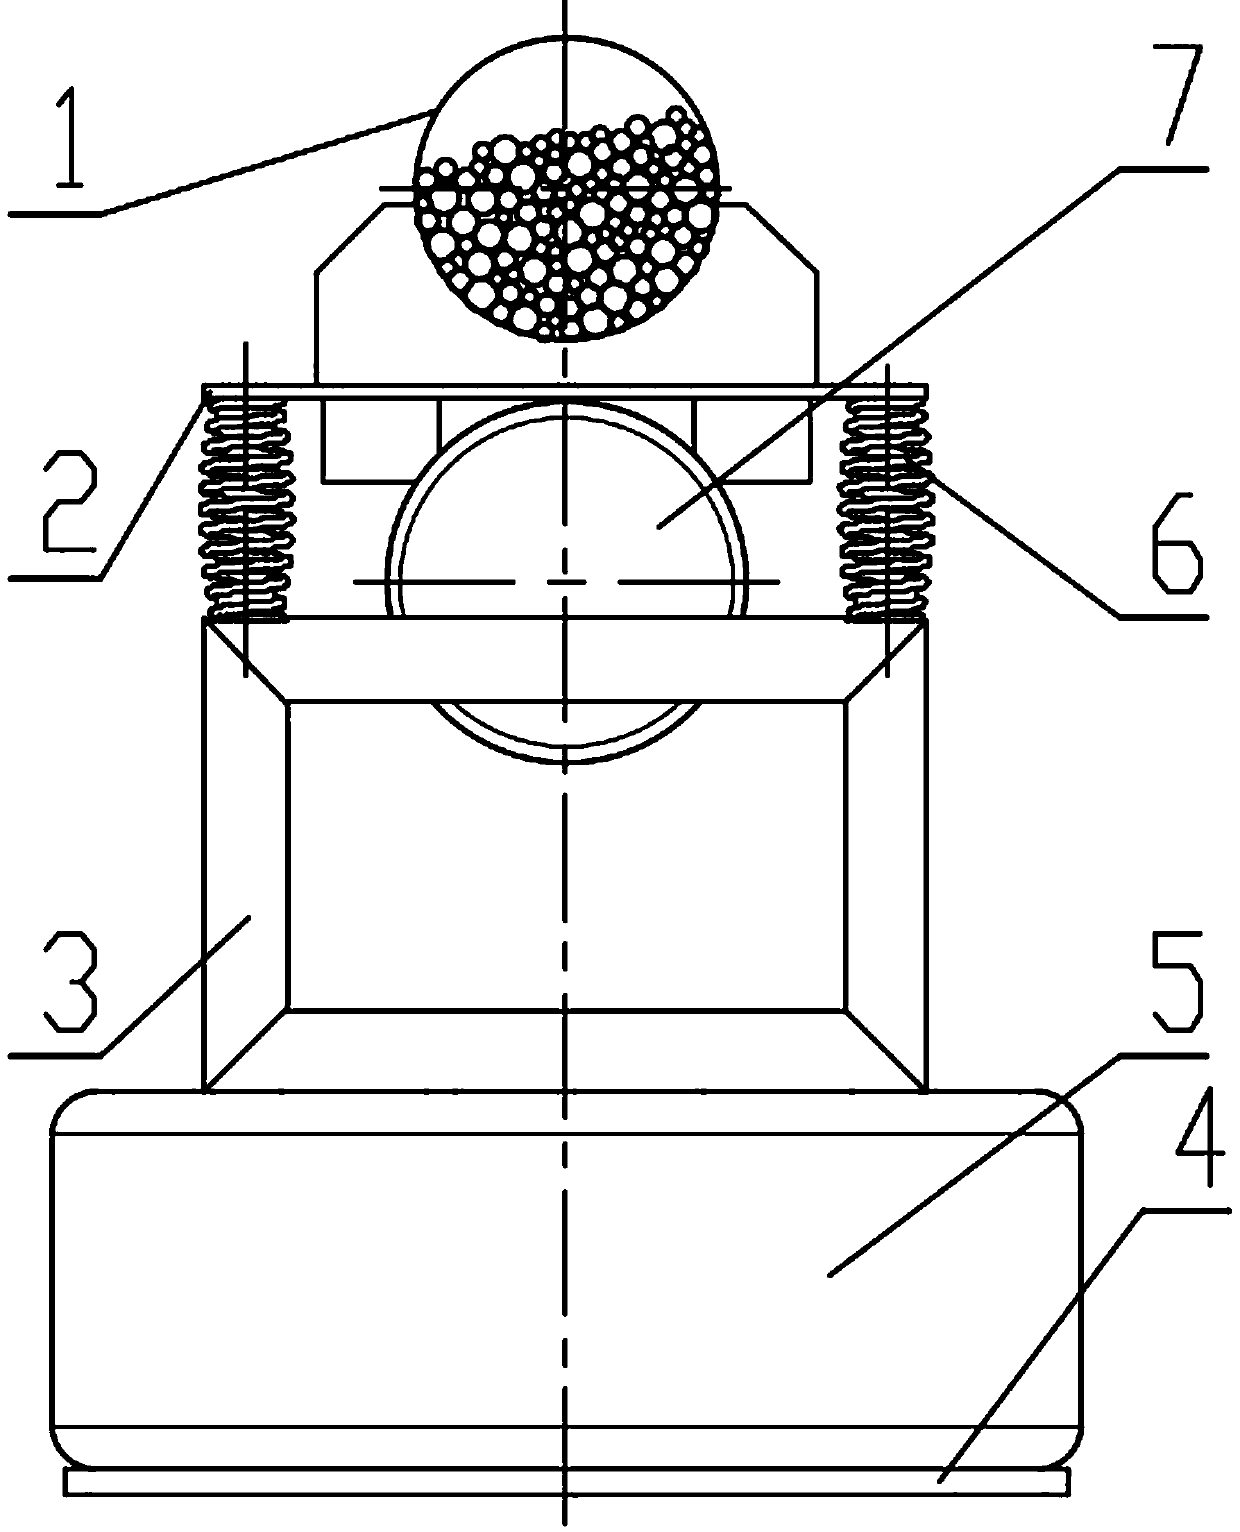 Mixed density medium double-plastid vibration mill with convex springs without join of cycles